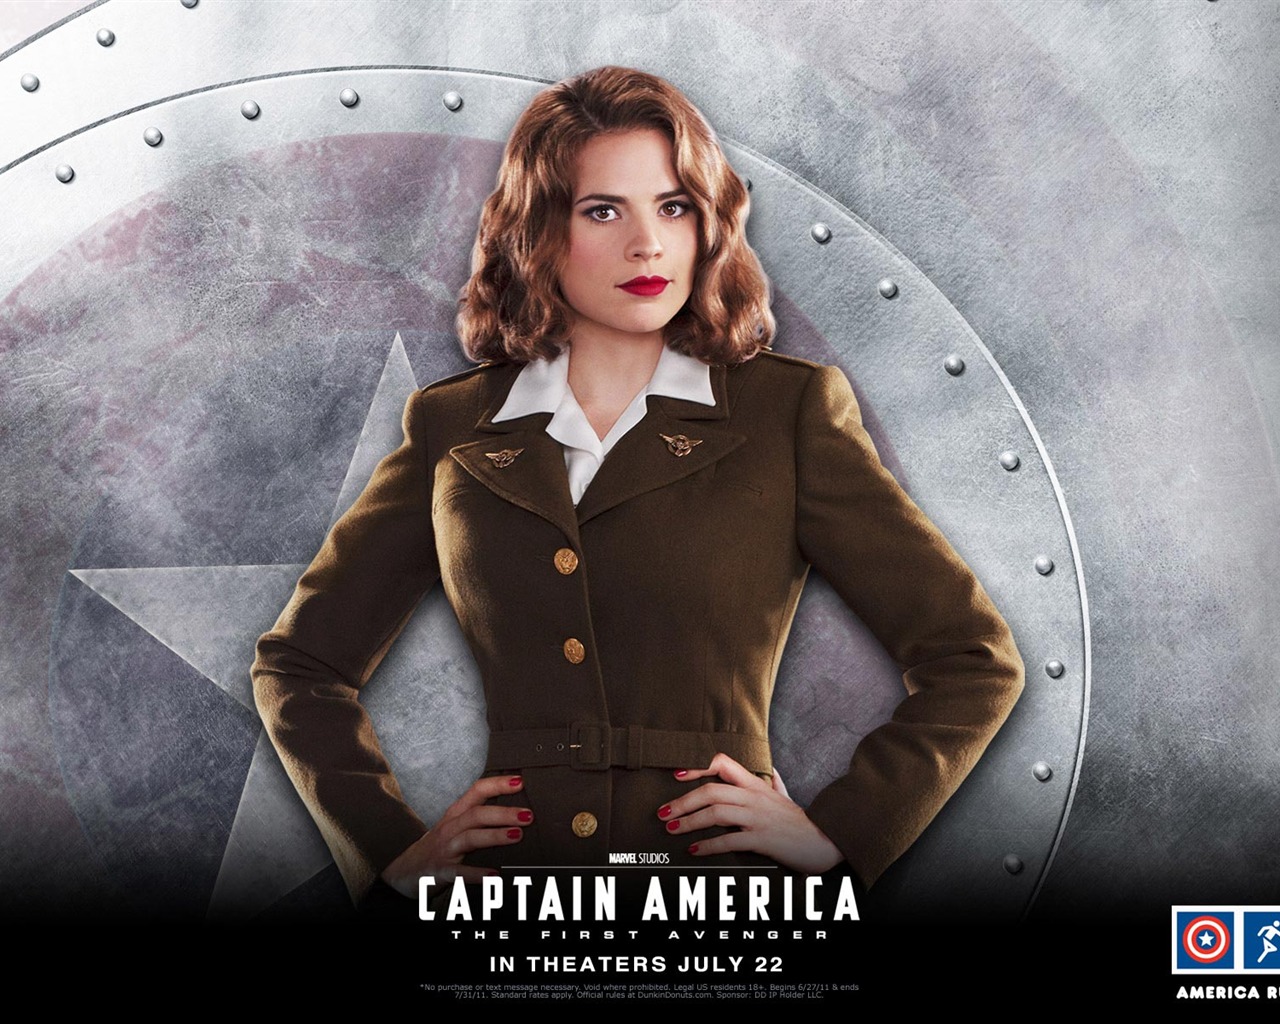 Captain America: The First Avenger wallpapers HD #8 - 1280x1024